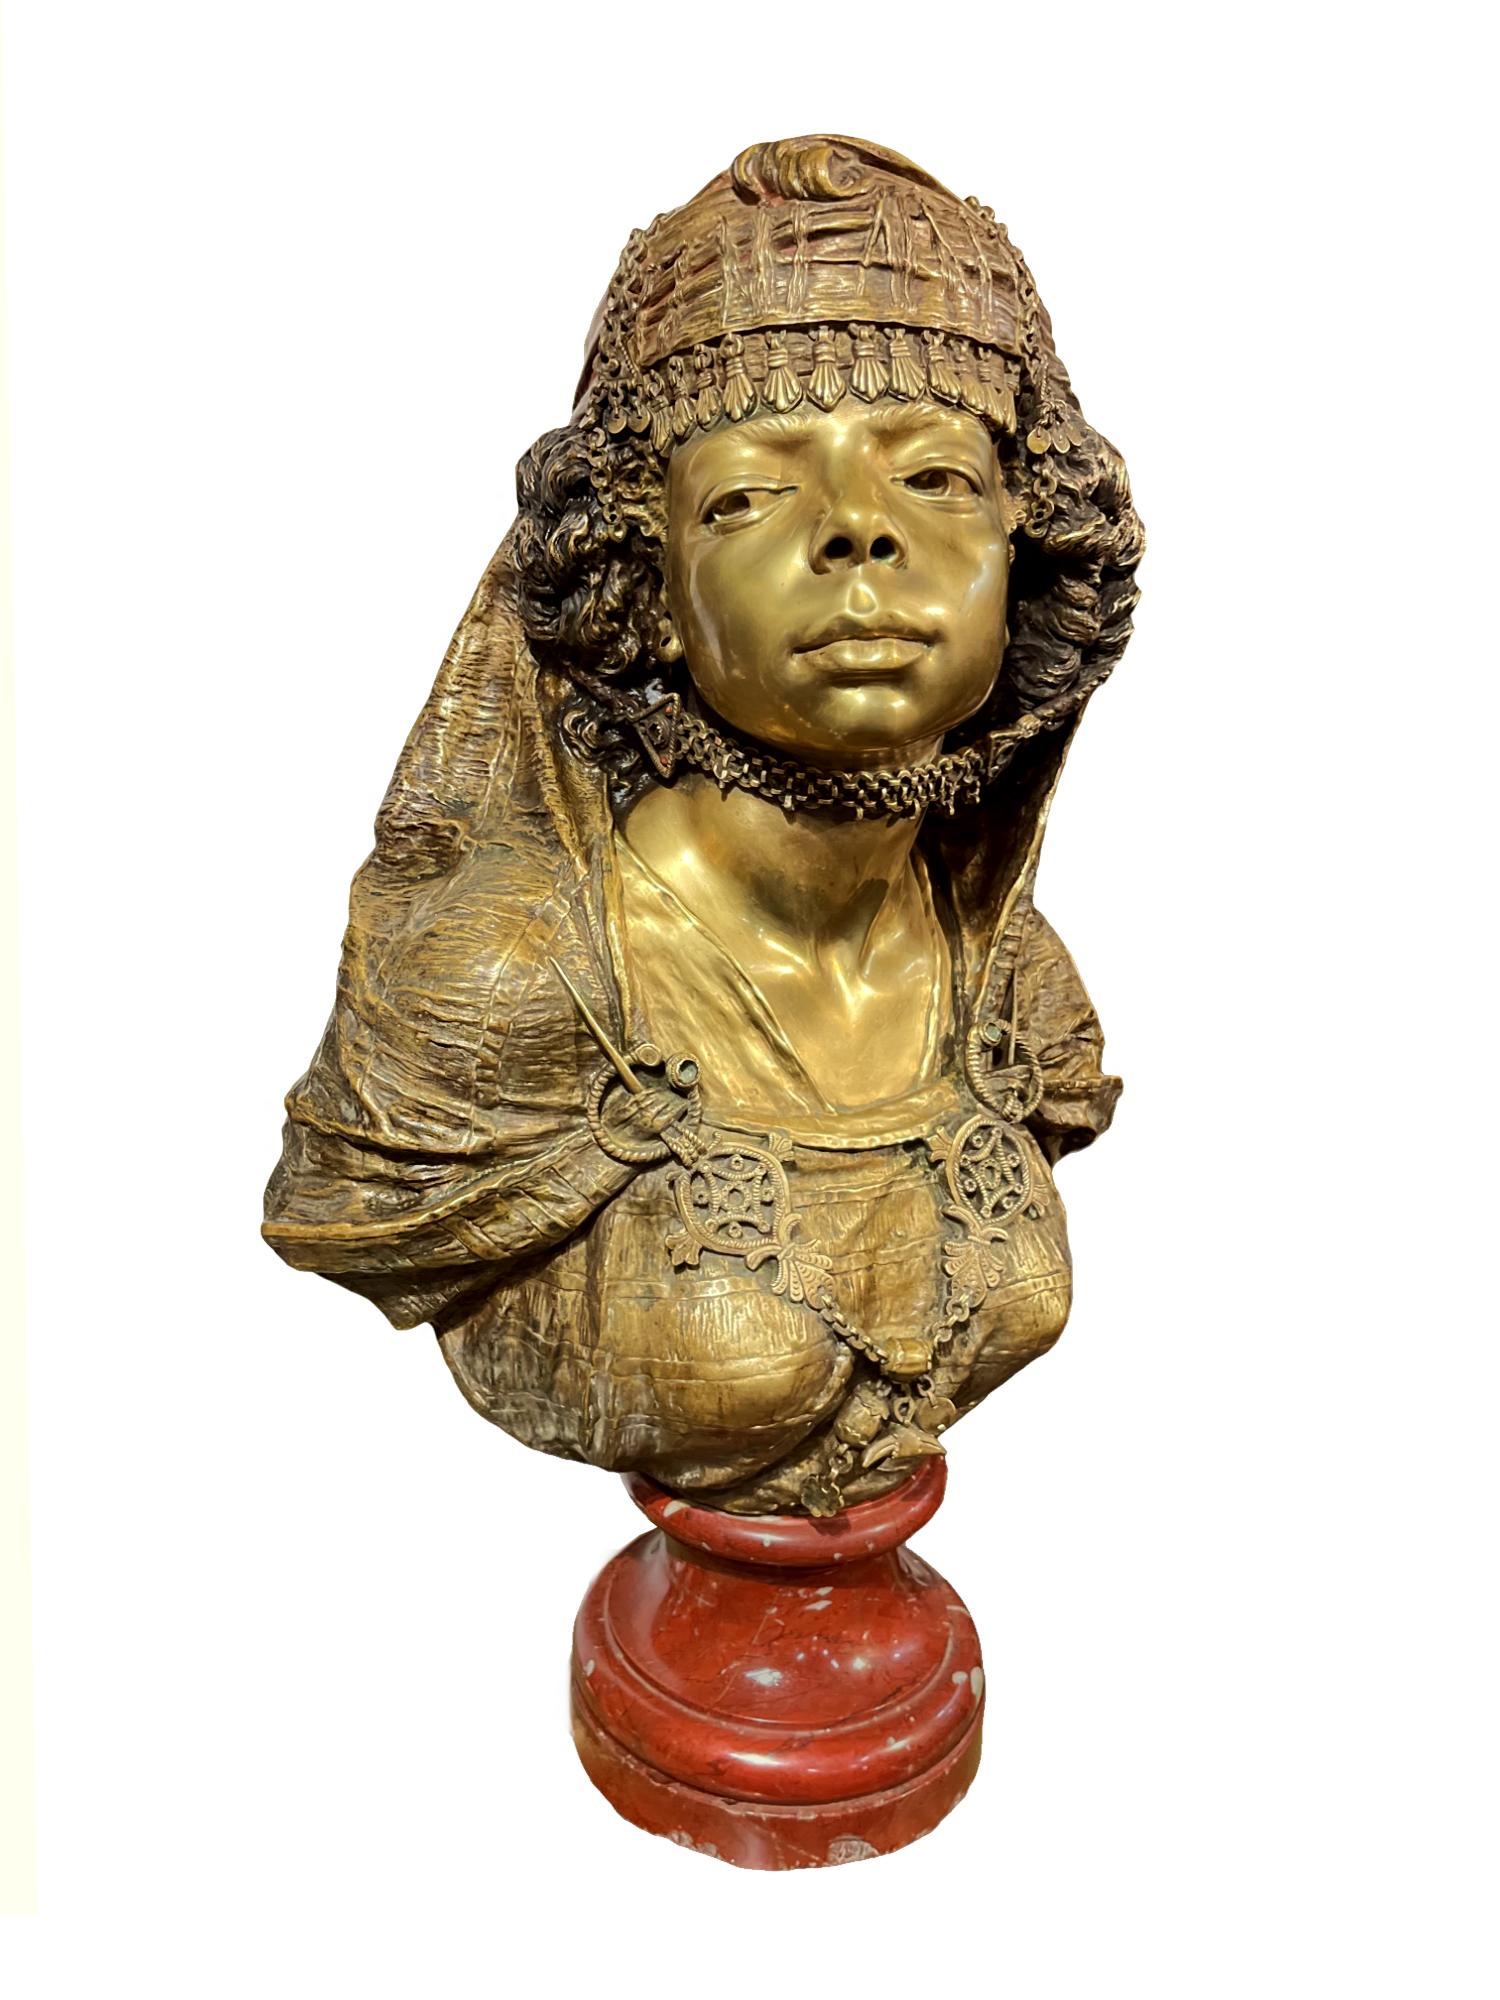 French Bronze high shine Orientalist Bust of Young Turkish Woman in Traditional Dress. Common for Orientalism, the bust is rendered in such high detail it feels as though the young woman sits before you. The gorgeous modeling showcases multiple